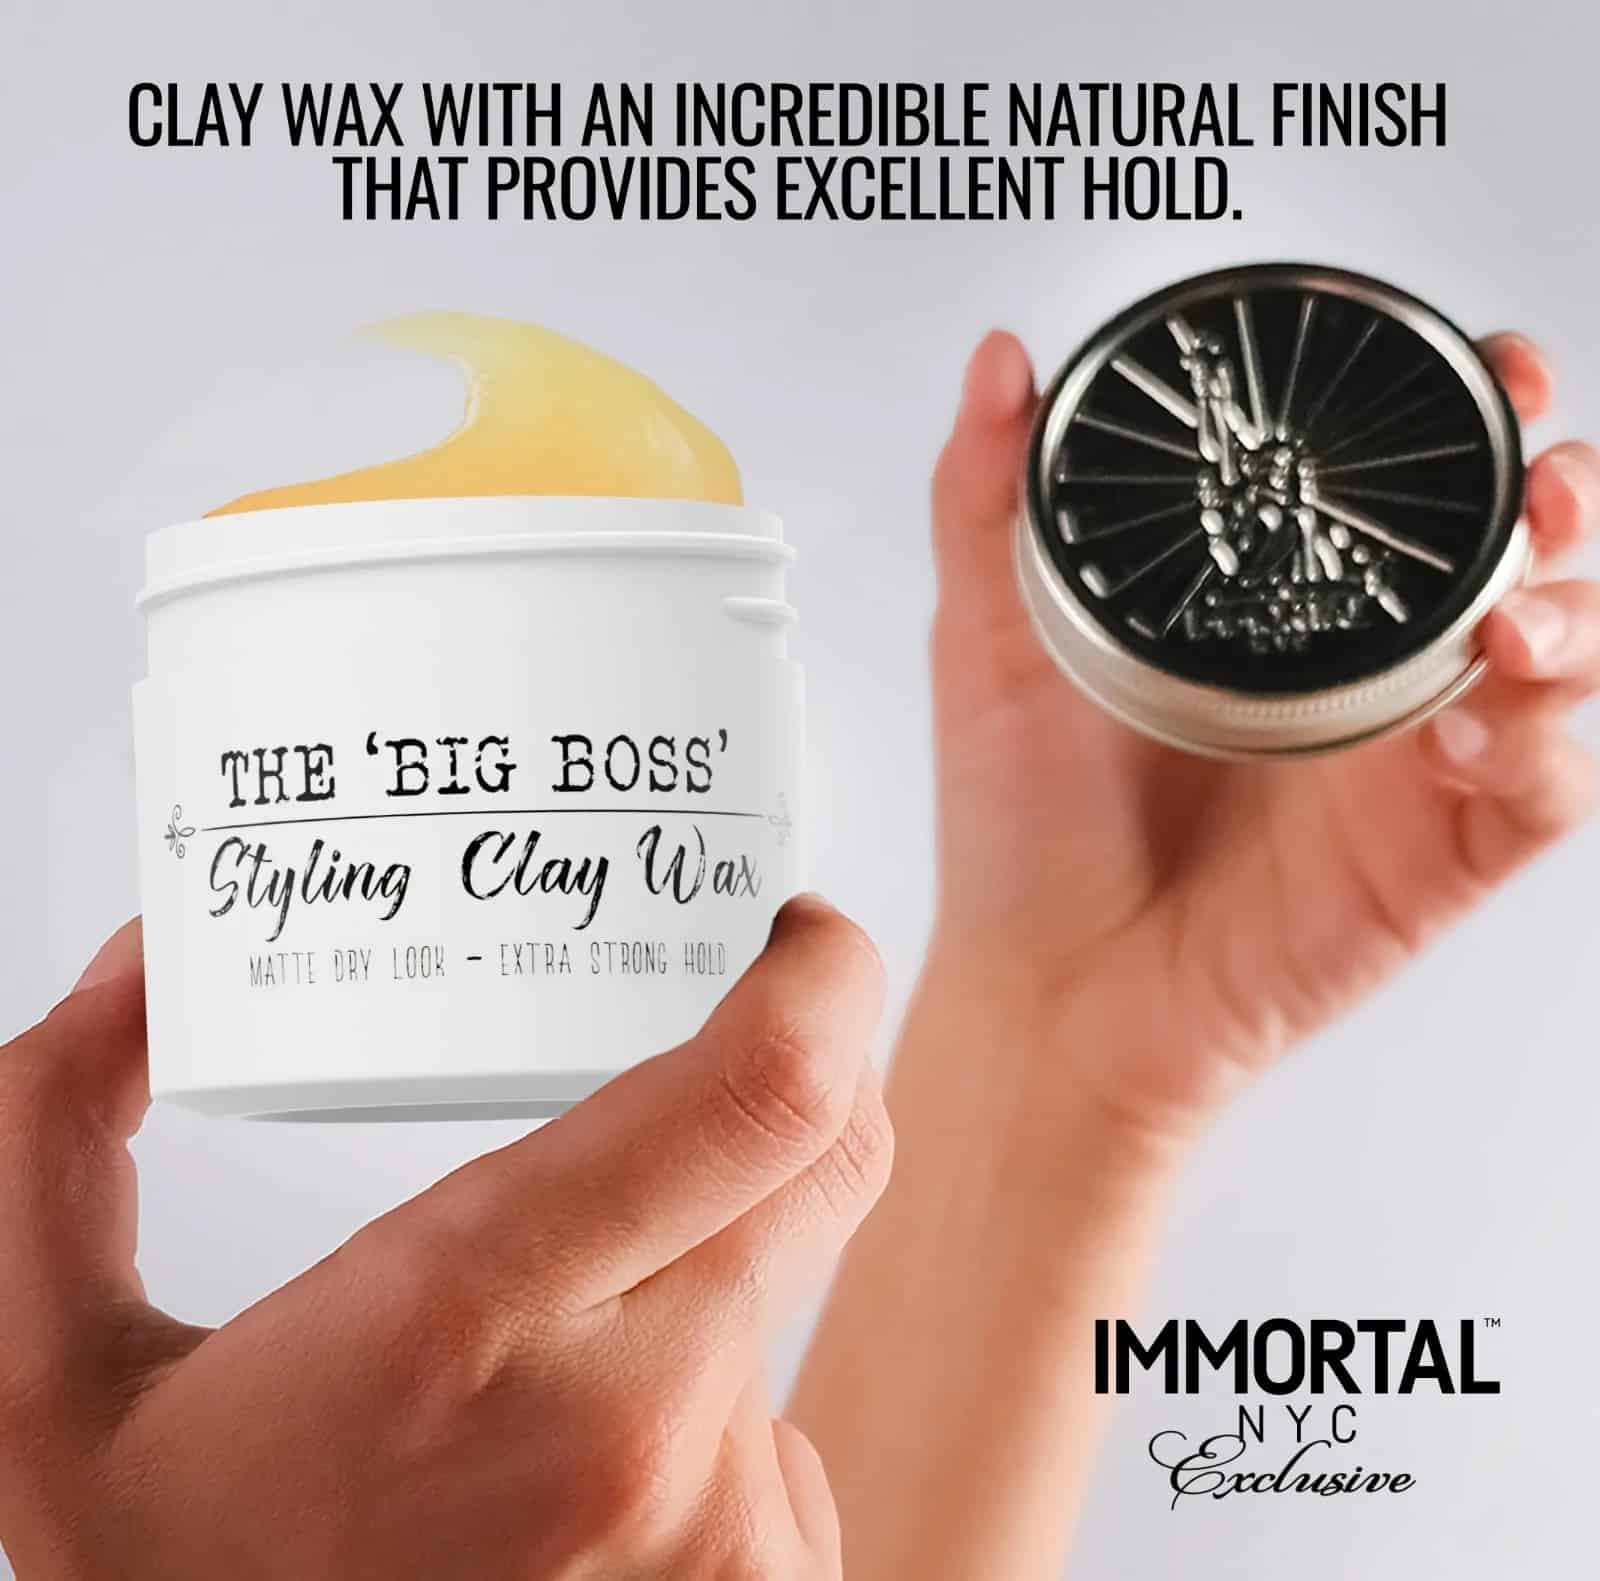 Immortal NYC The Big Boss Styling Clay Wax Poster